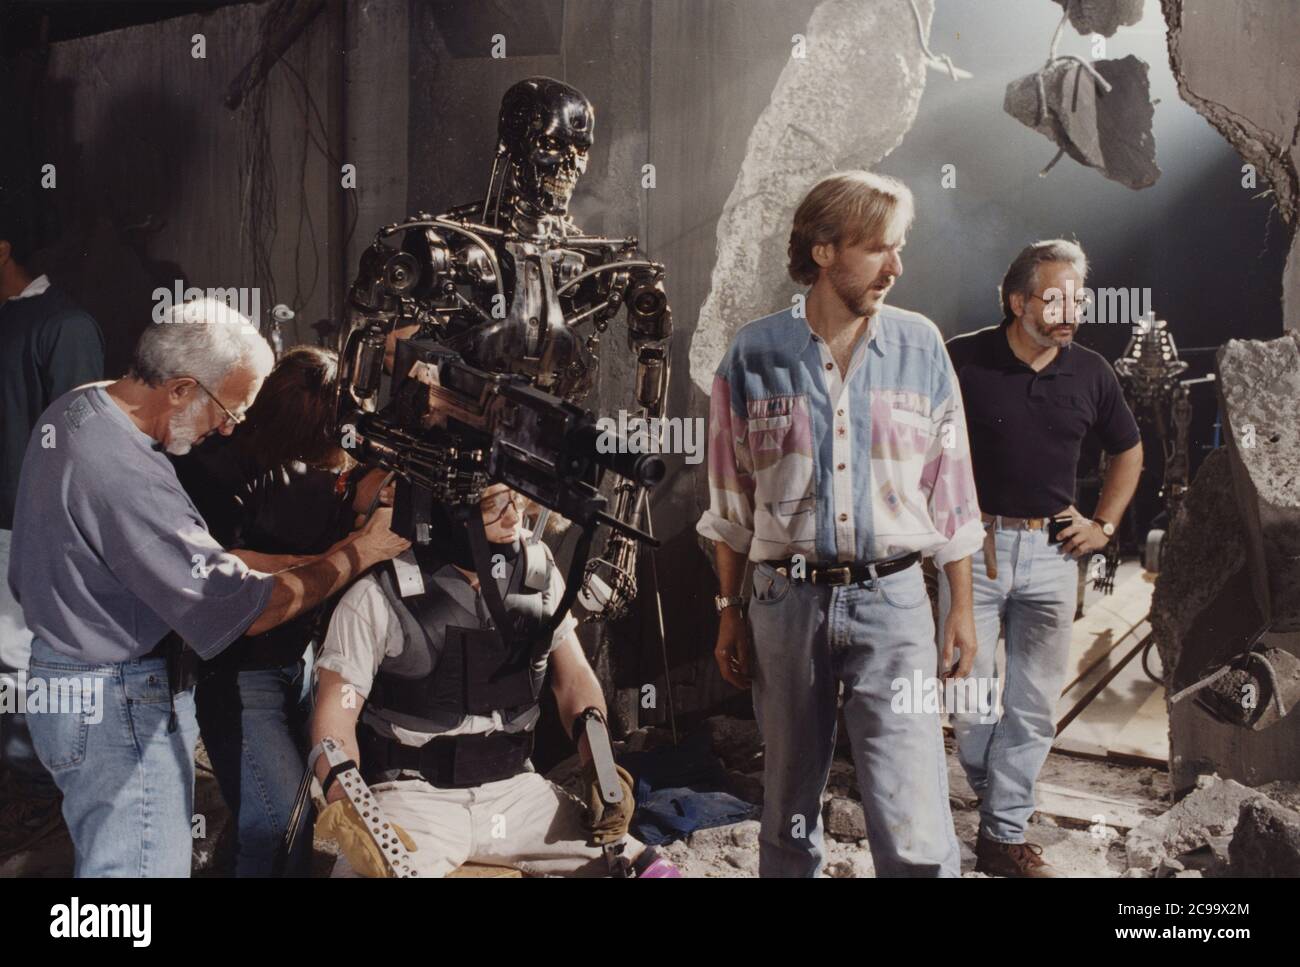 Orlando.Florida.USA. Director James Cameron (blue-red shirt) on a set in  Nevada to shoot 3D scenes for an attraction at ©Universal Studiios, T2-3D:  Battle Across Time (1996) (also known as Terminator 2: 3D)